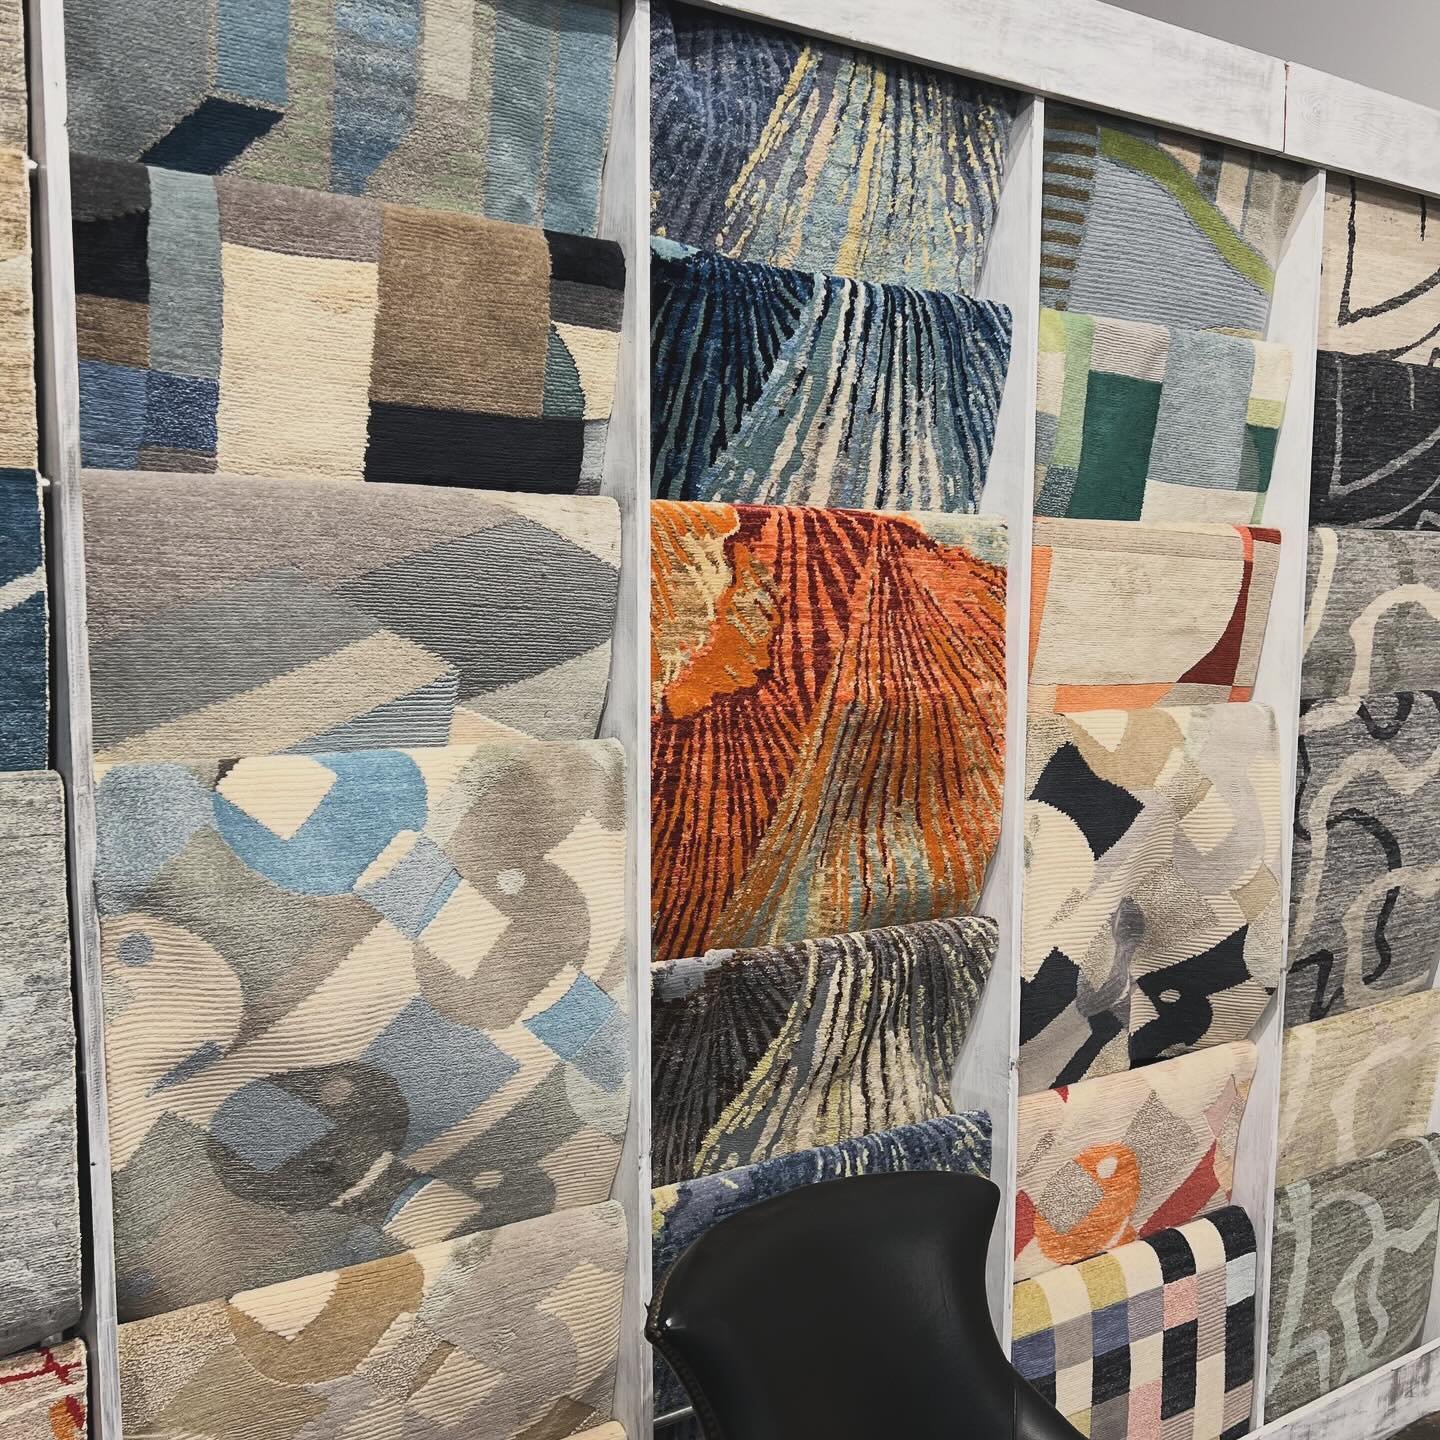 Obligatory showroom shots of our sample-sized rugs. You&rsquo;ll find a plethora of designs and textures. We have more on the way, so these walls won&rsquo;t look the same next time around! Visit our NYC showroom to see these and more.
.
.
.
#showroo